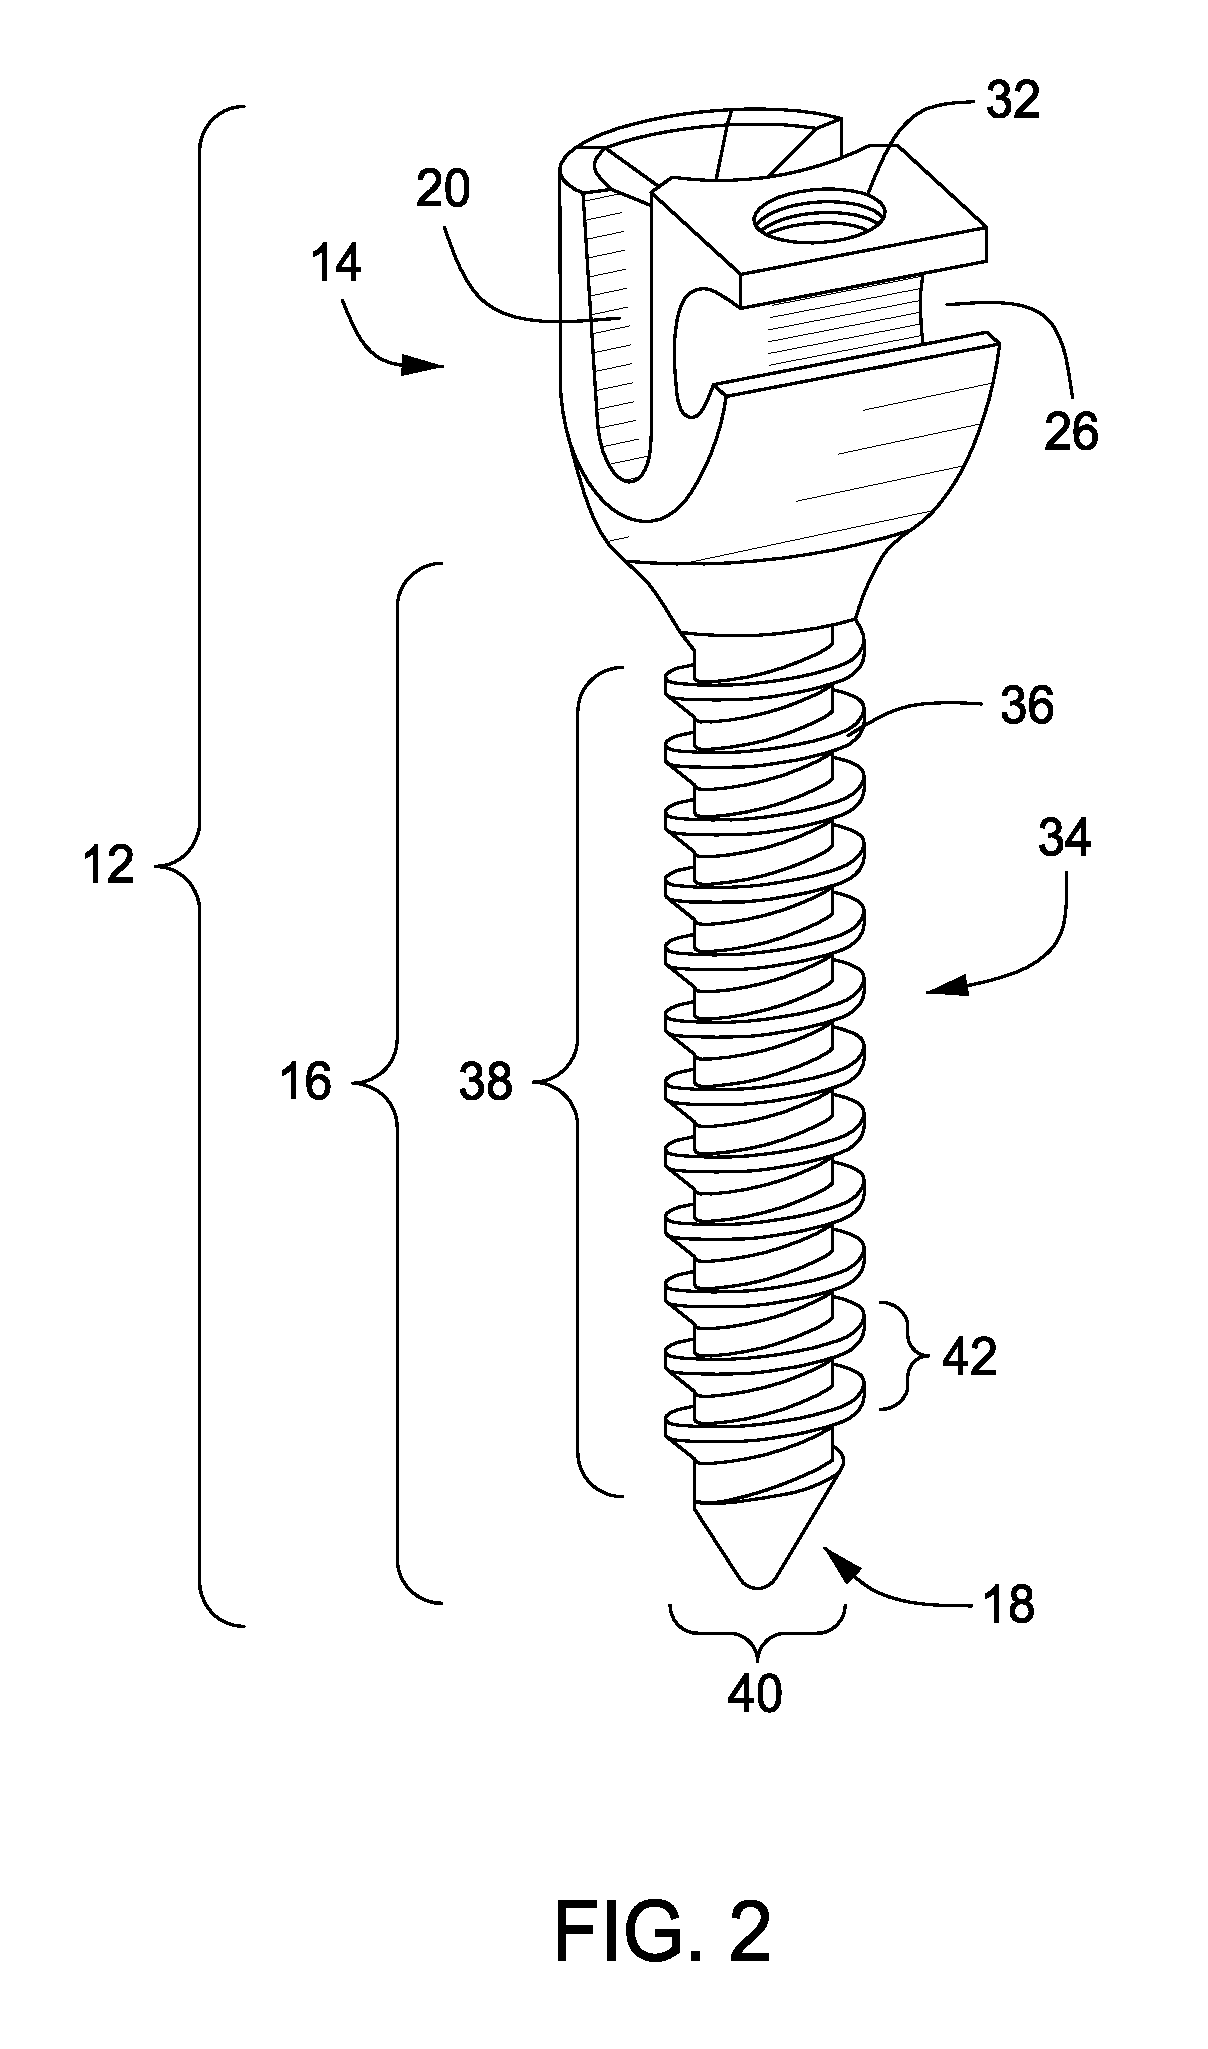 Orthopedic Fastener for Stabilization and Fixation